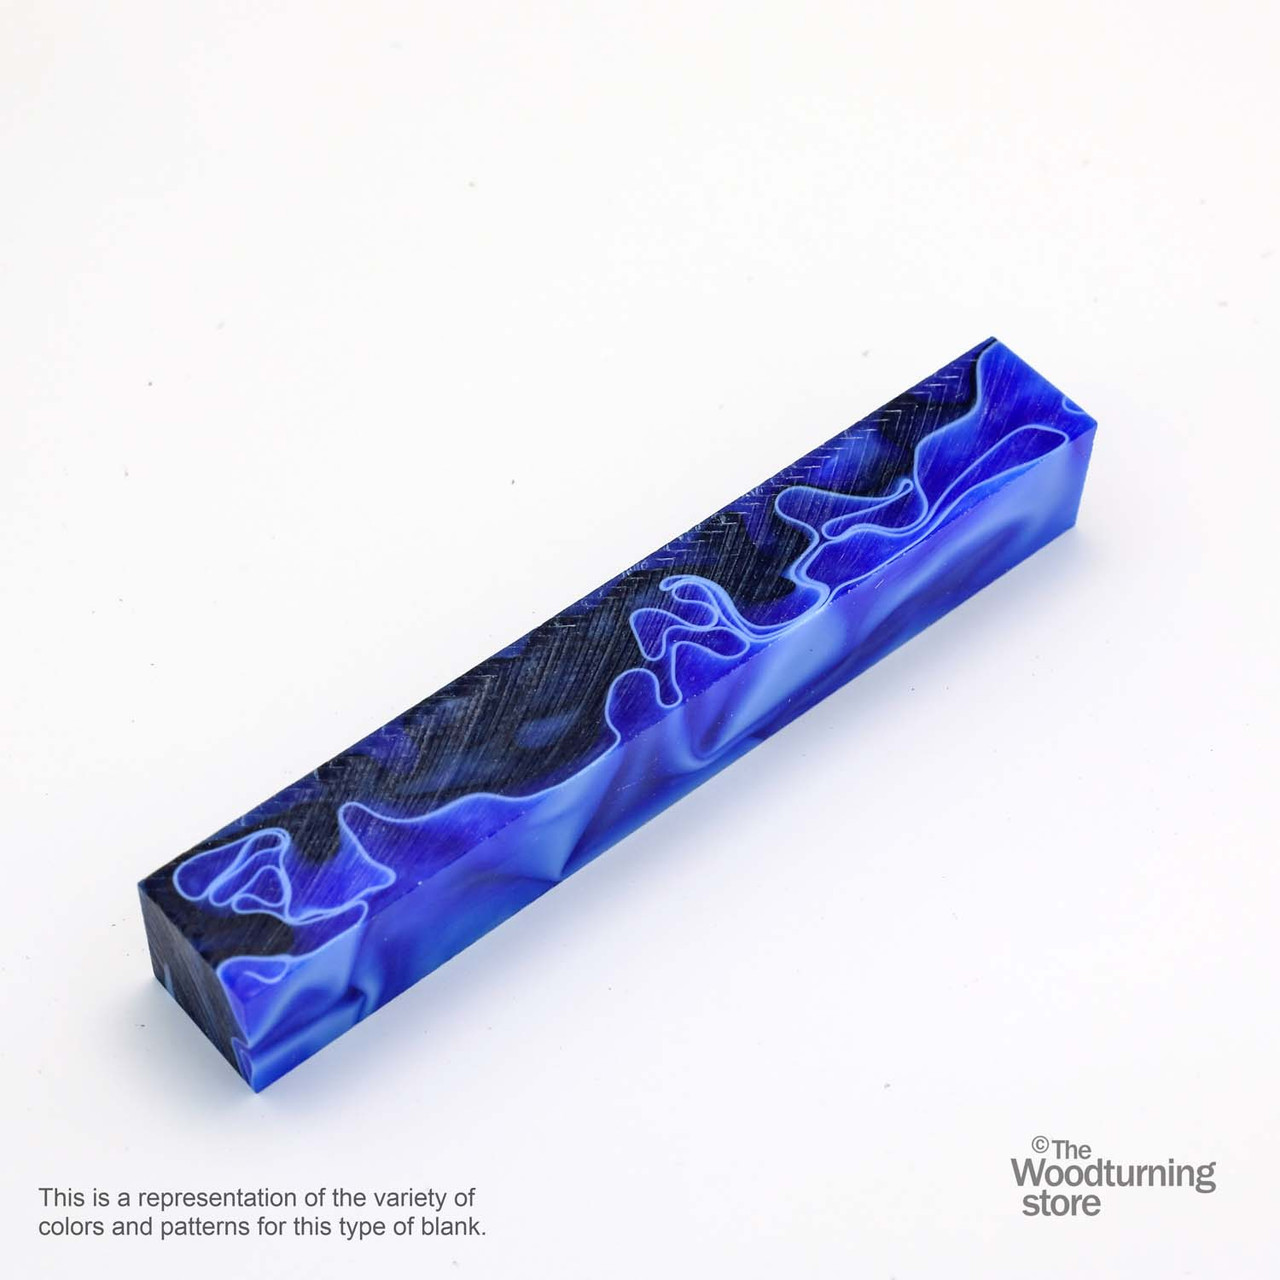 Legacy Acrylic Pen Blank, Royal Blue and Black Swirl with White Lines